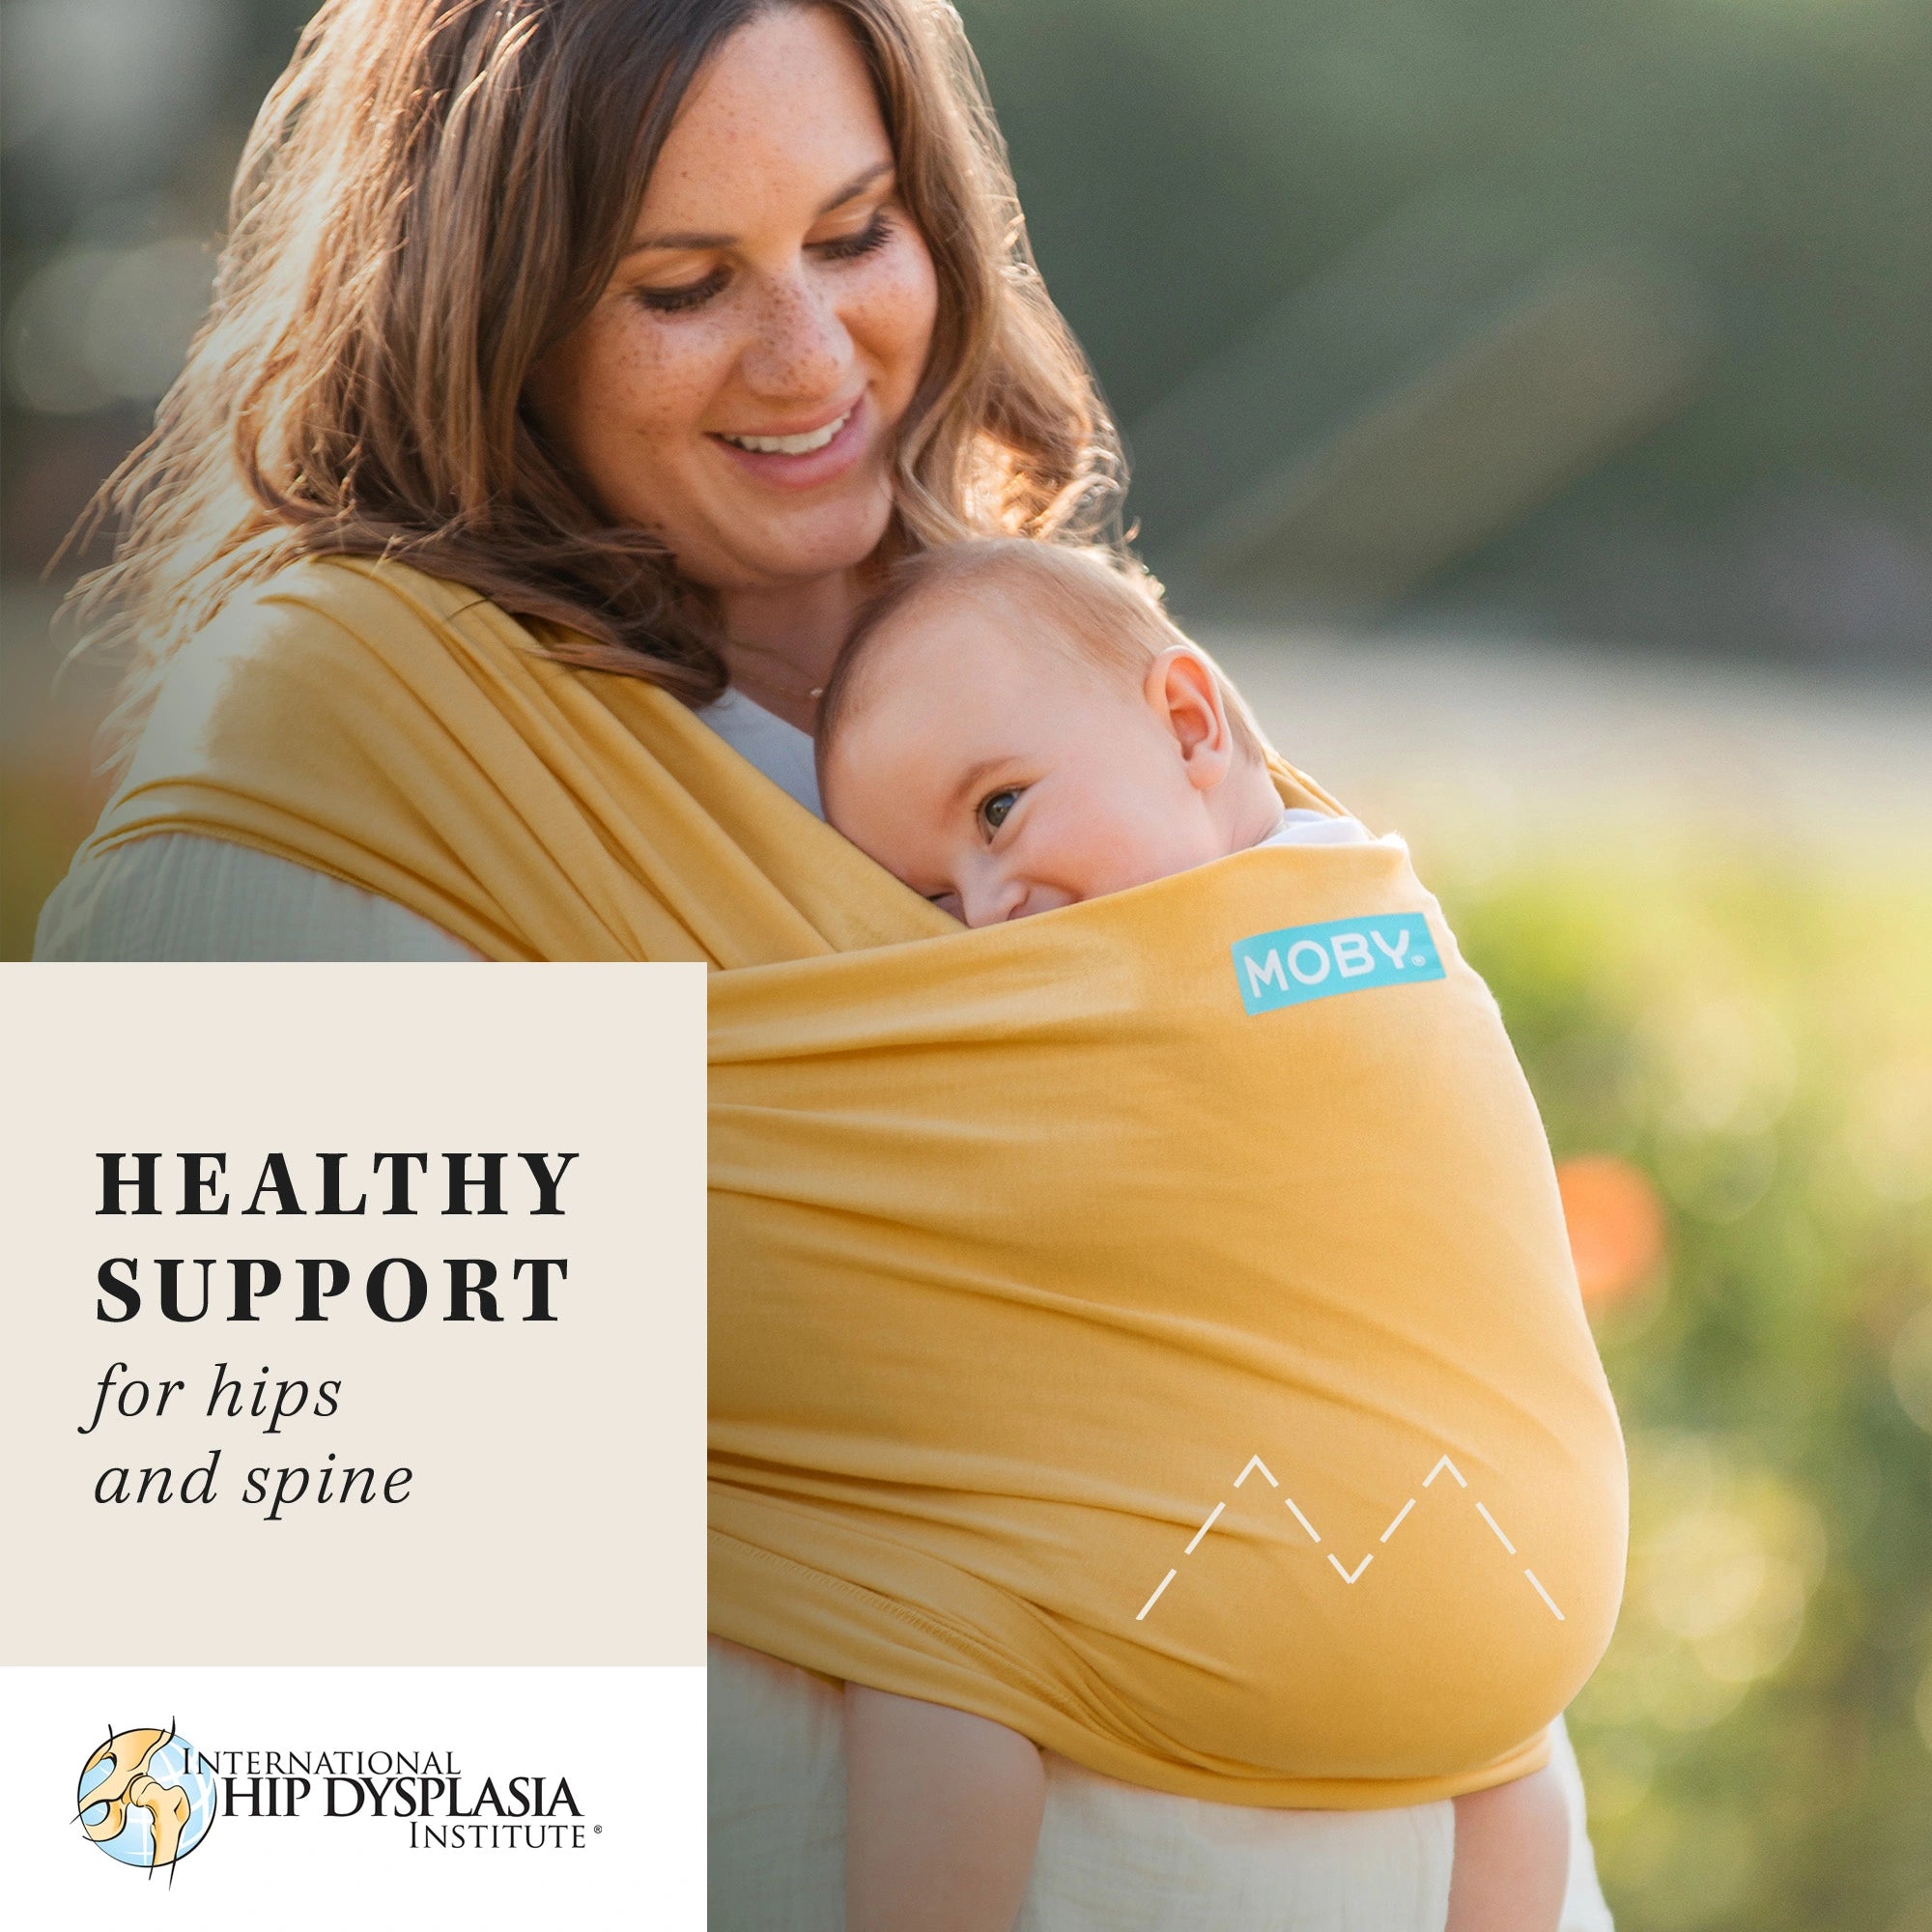 moby wrap healthy support for growing babies hips and spine certified by the international hip dysplasia institute